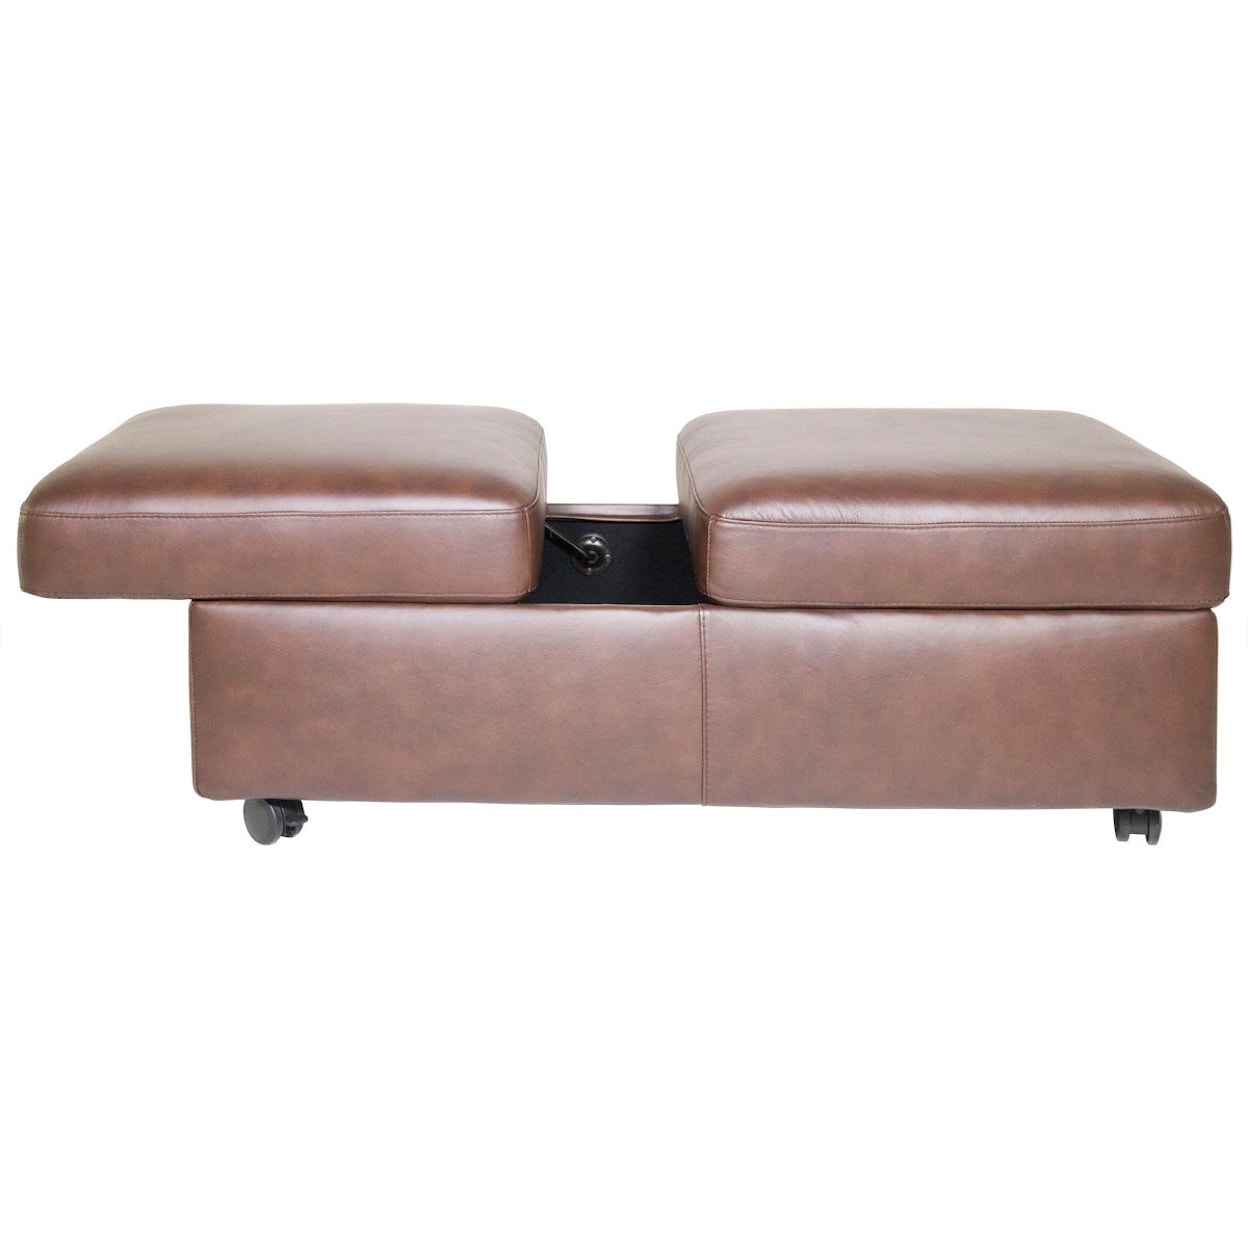 Stressless by Ekornes Wave Double Ottoman and Table